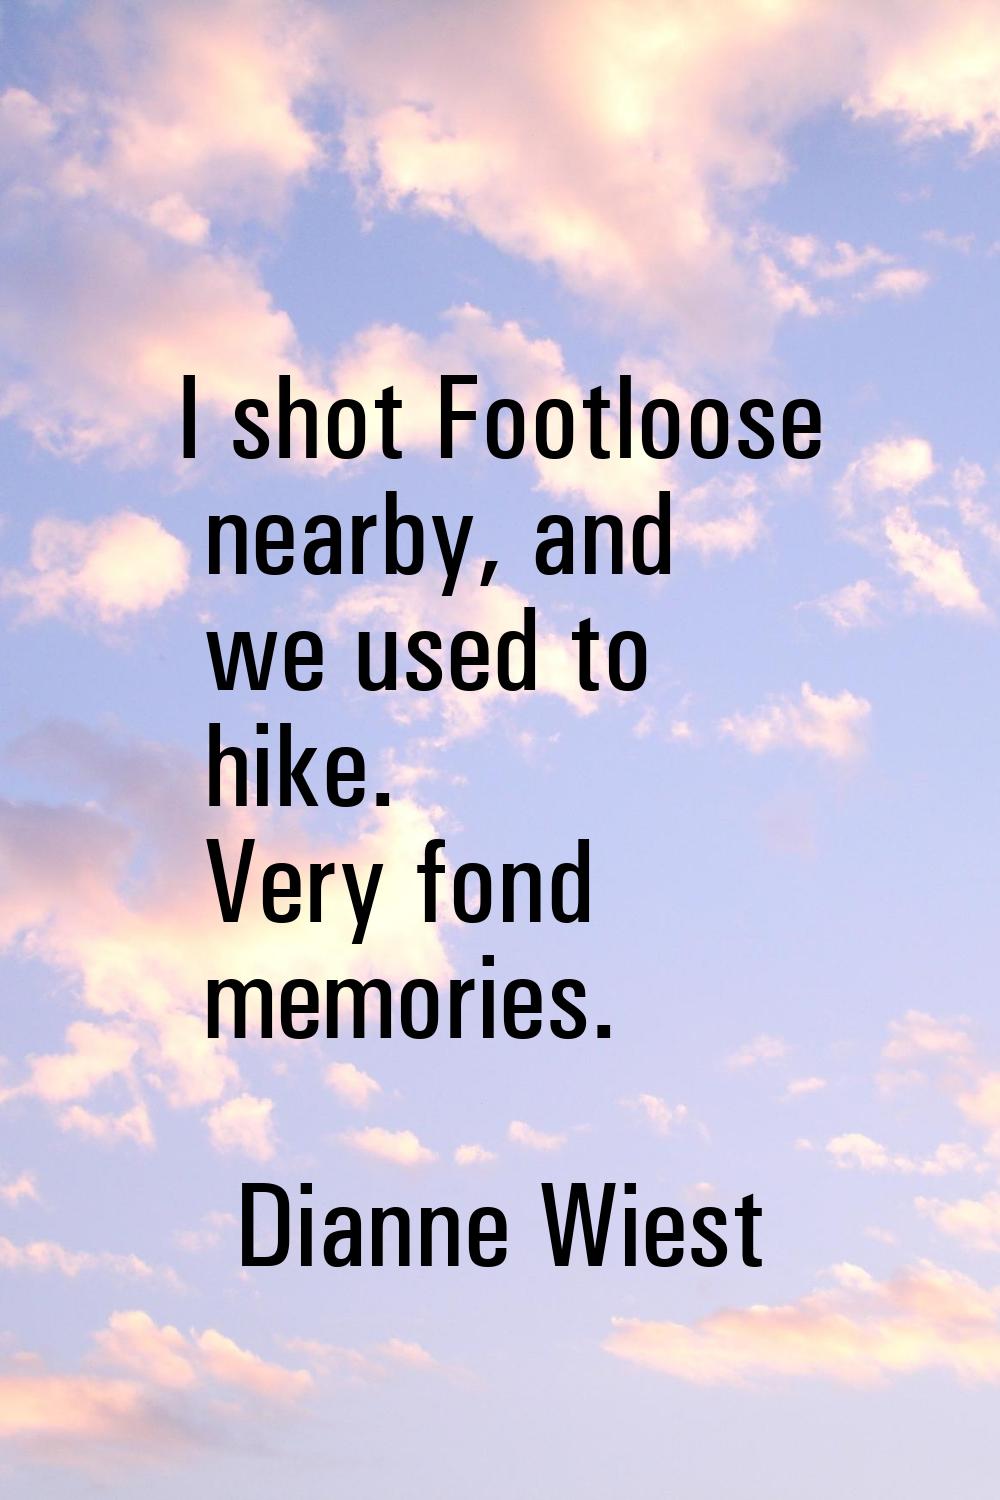 I shot Footloose nearby, and we used to hike. Very fond memories.